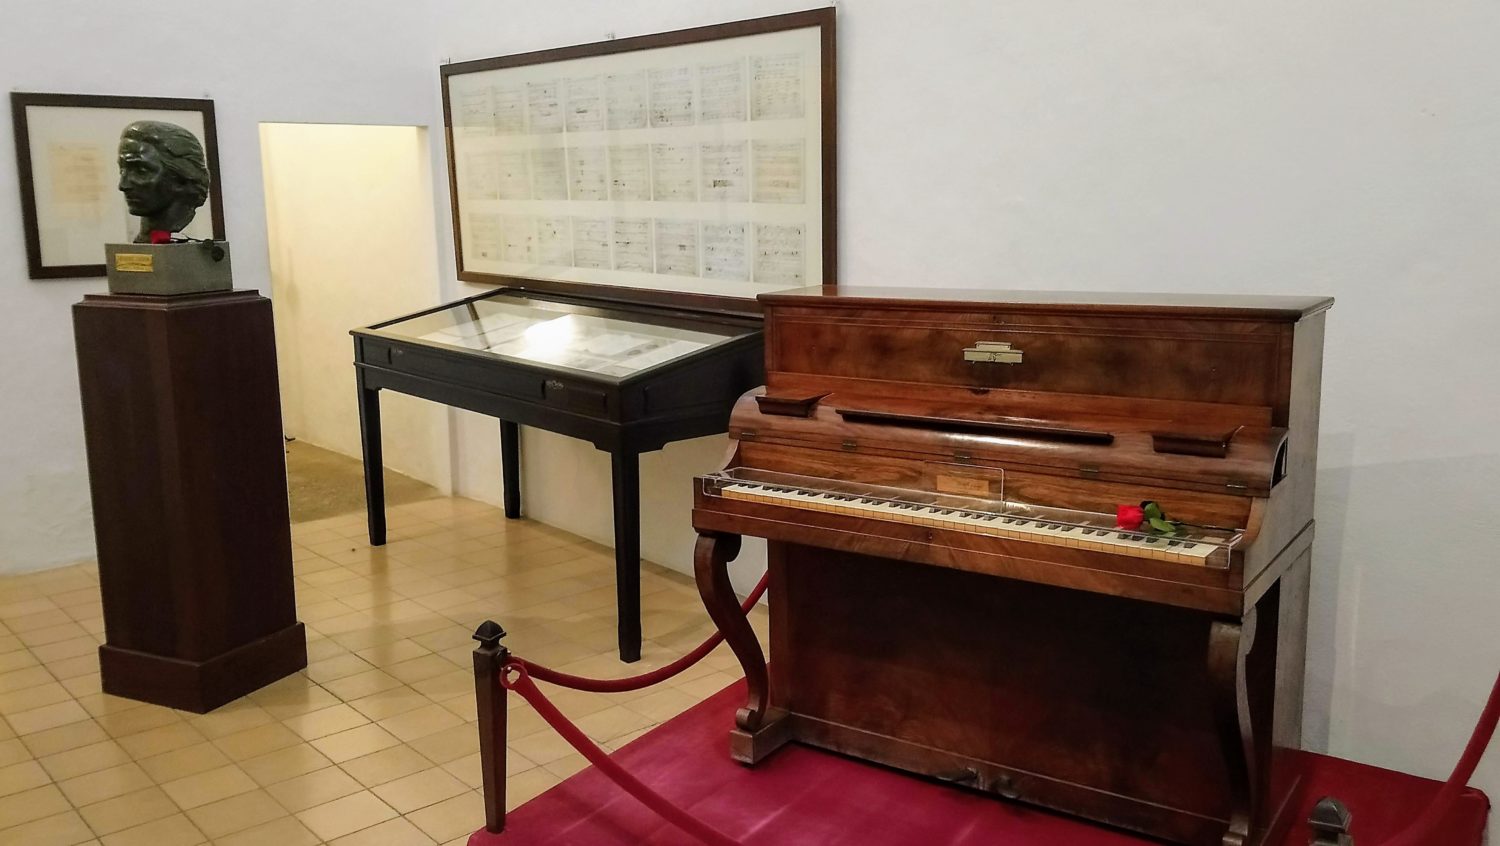 Valldemossa, Chopin, George Sand and Cell No. 4, or Chopin's cell in  Mallorca - tourist attractions, What to see? Guide.